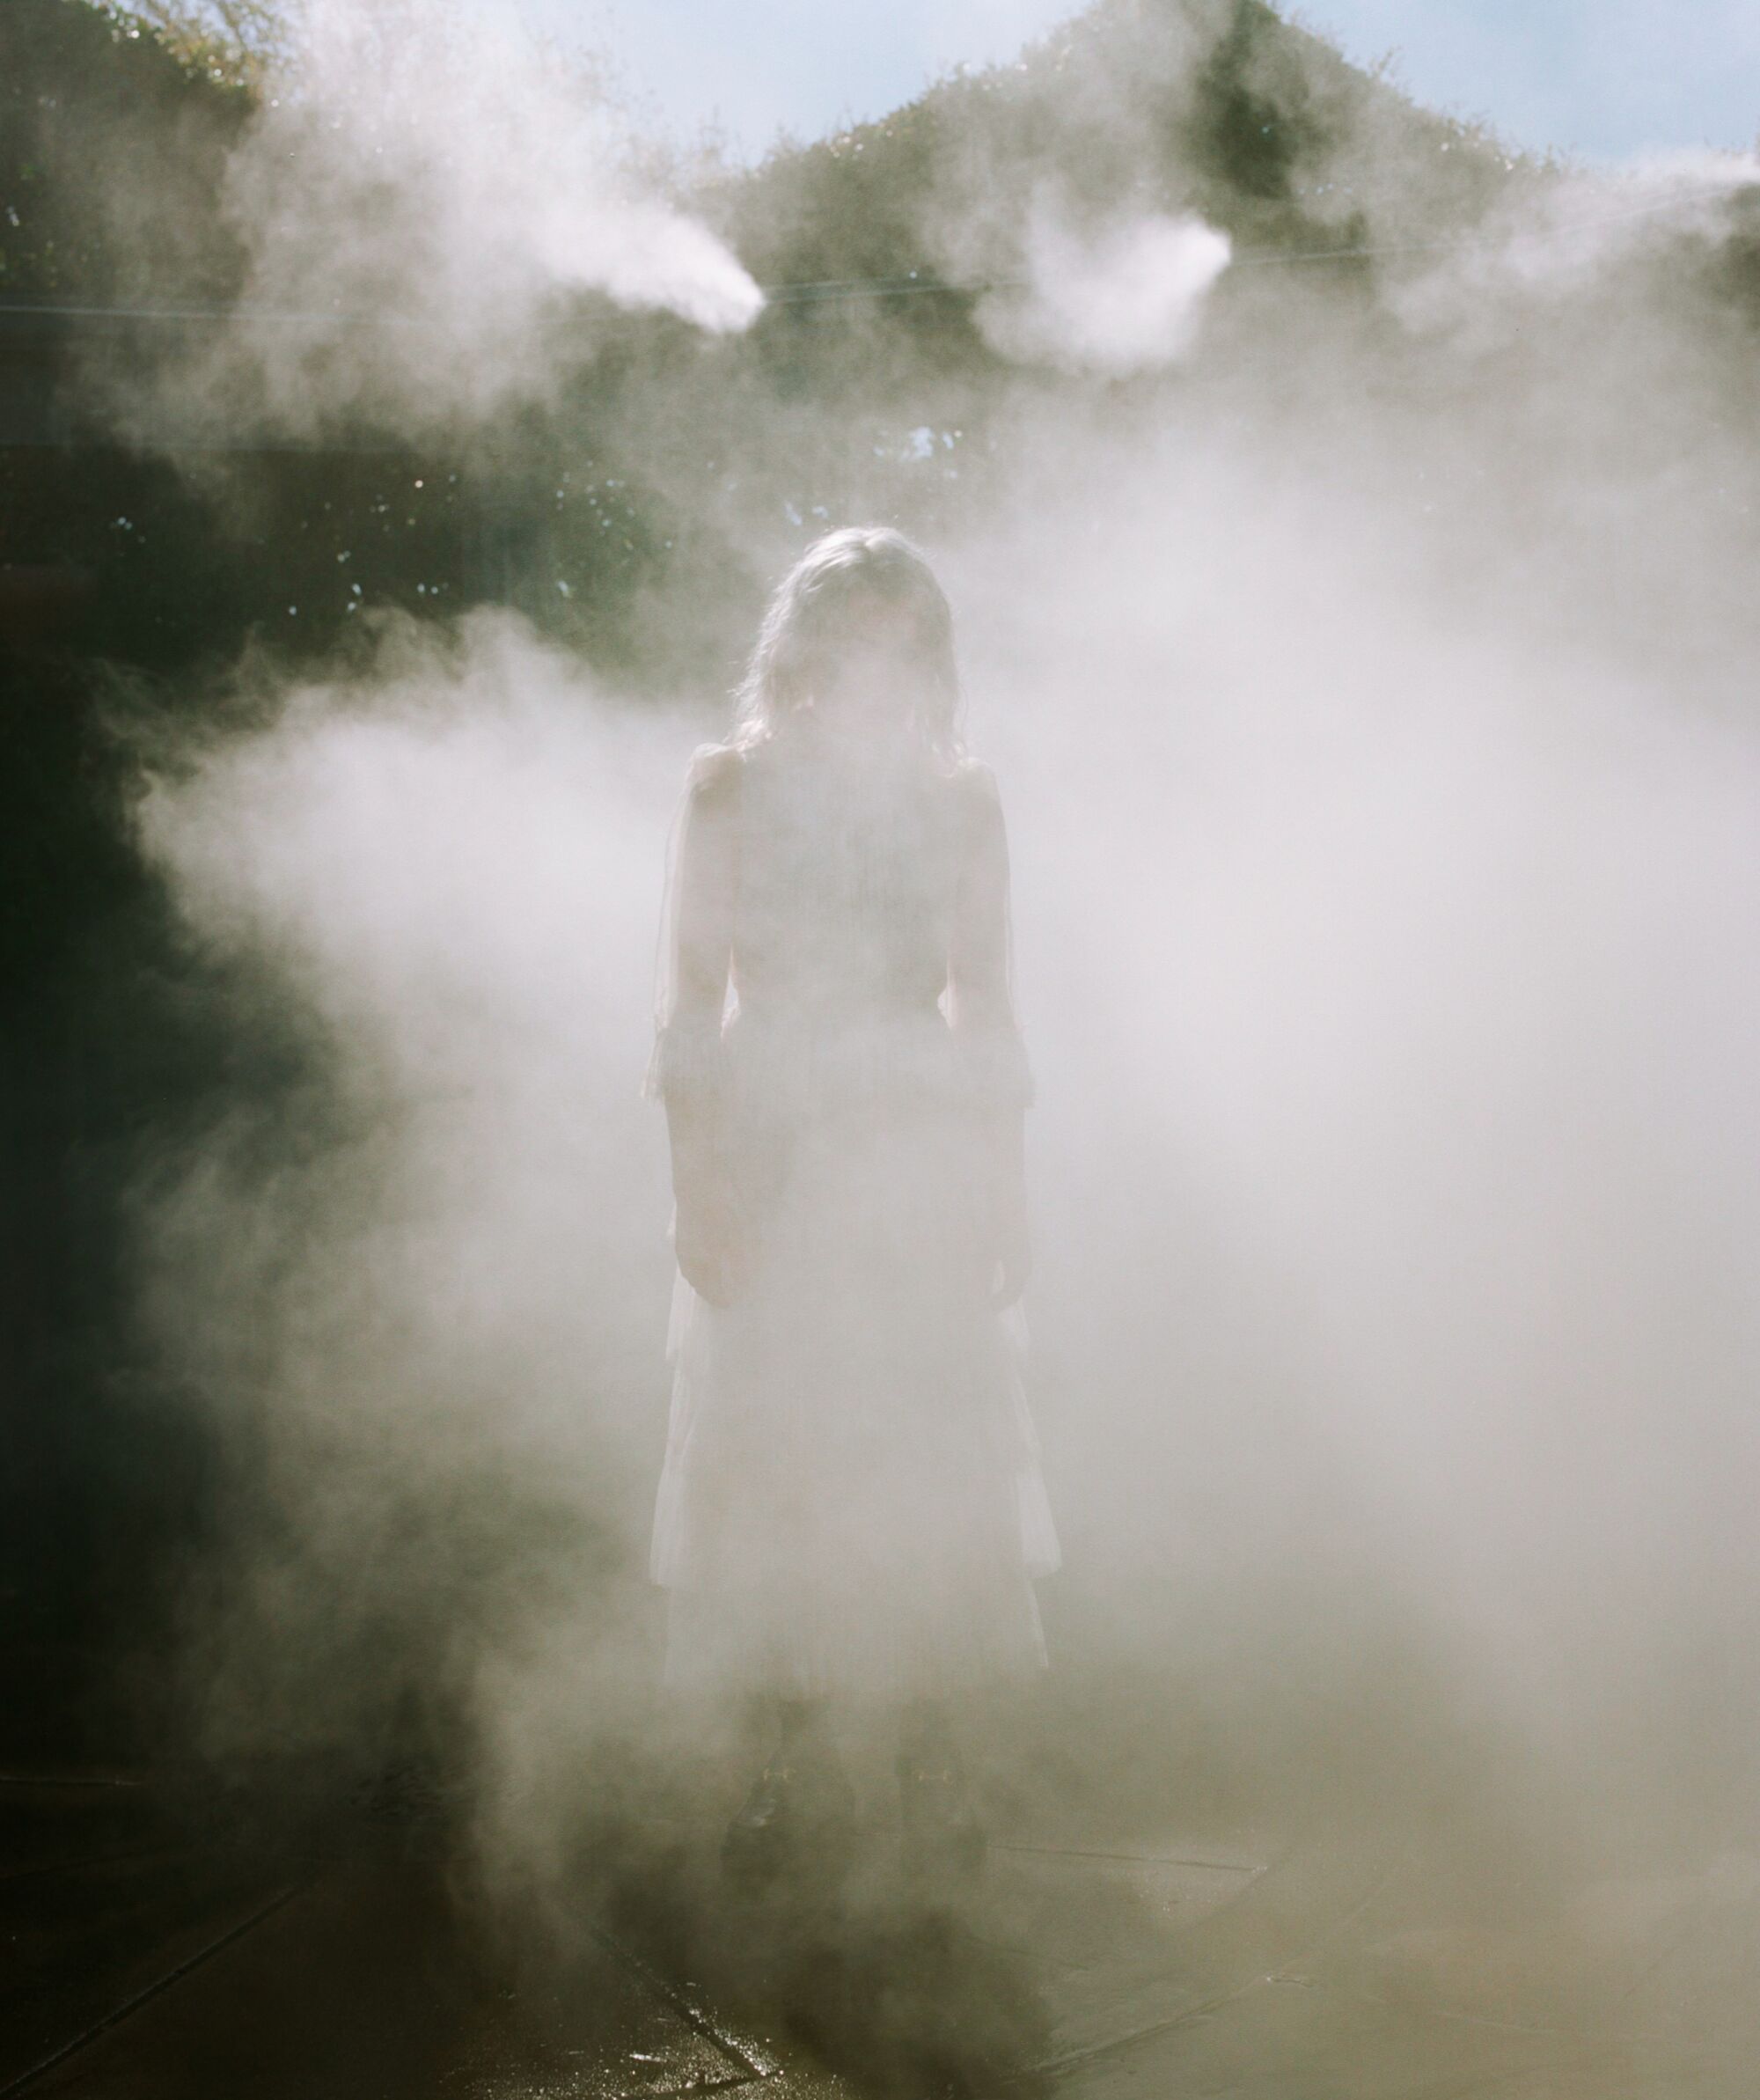 A woman stands in a cloud of mist.